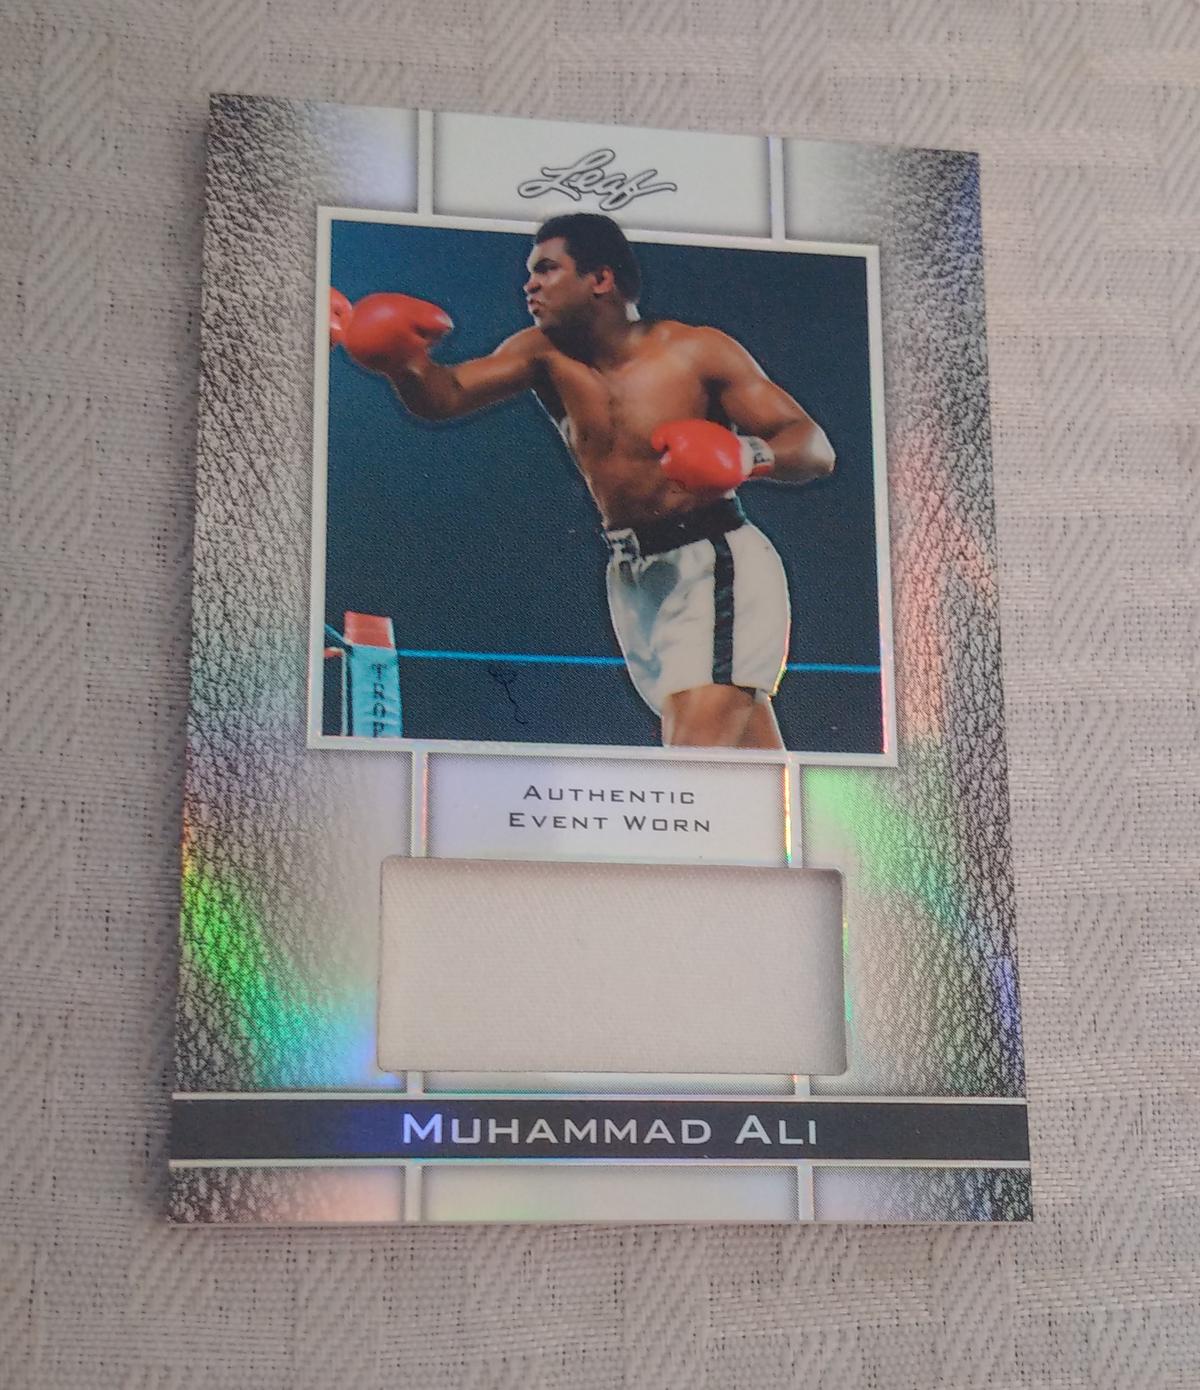 2011 Leaf Muhammad Ali Authentic Event Worn Used Swatch 59/70 Boxer Boxing